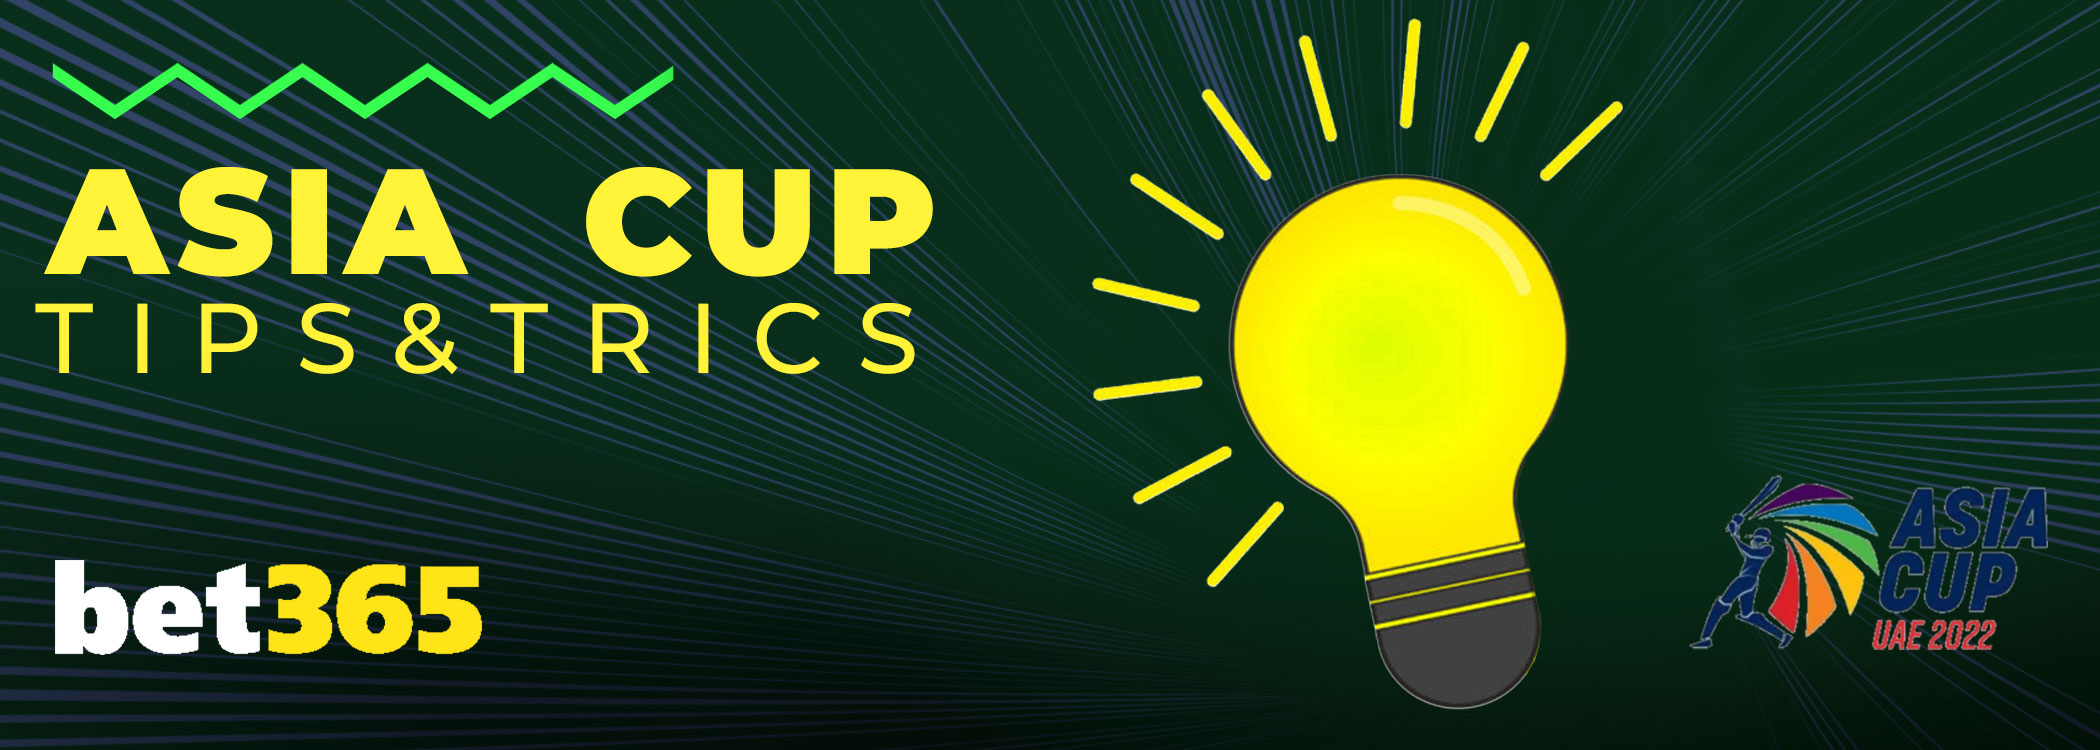 Asia cup tips and trics on the bet365.